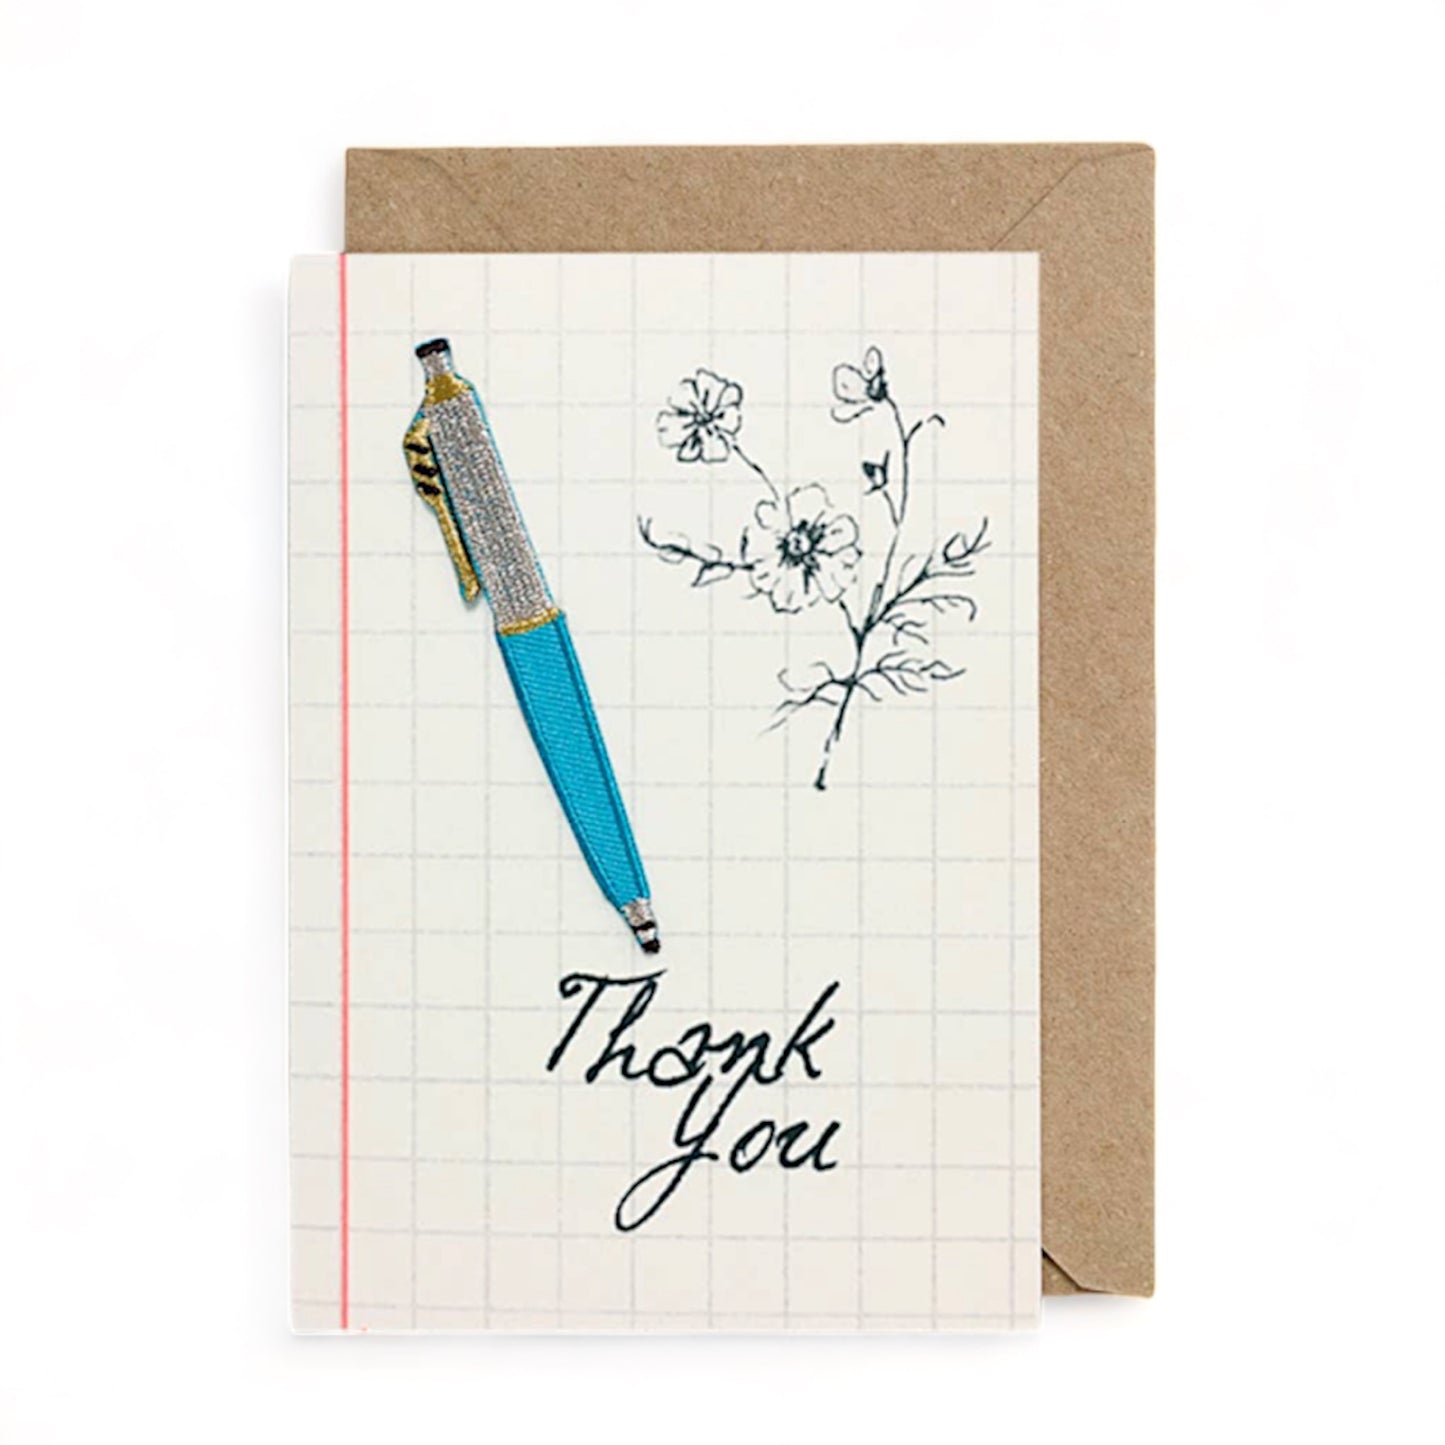 Ink Pen Patch Greeting Card - Thank You Doodle